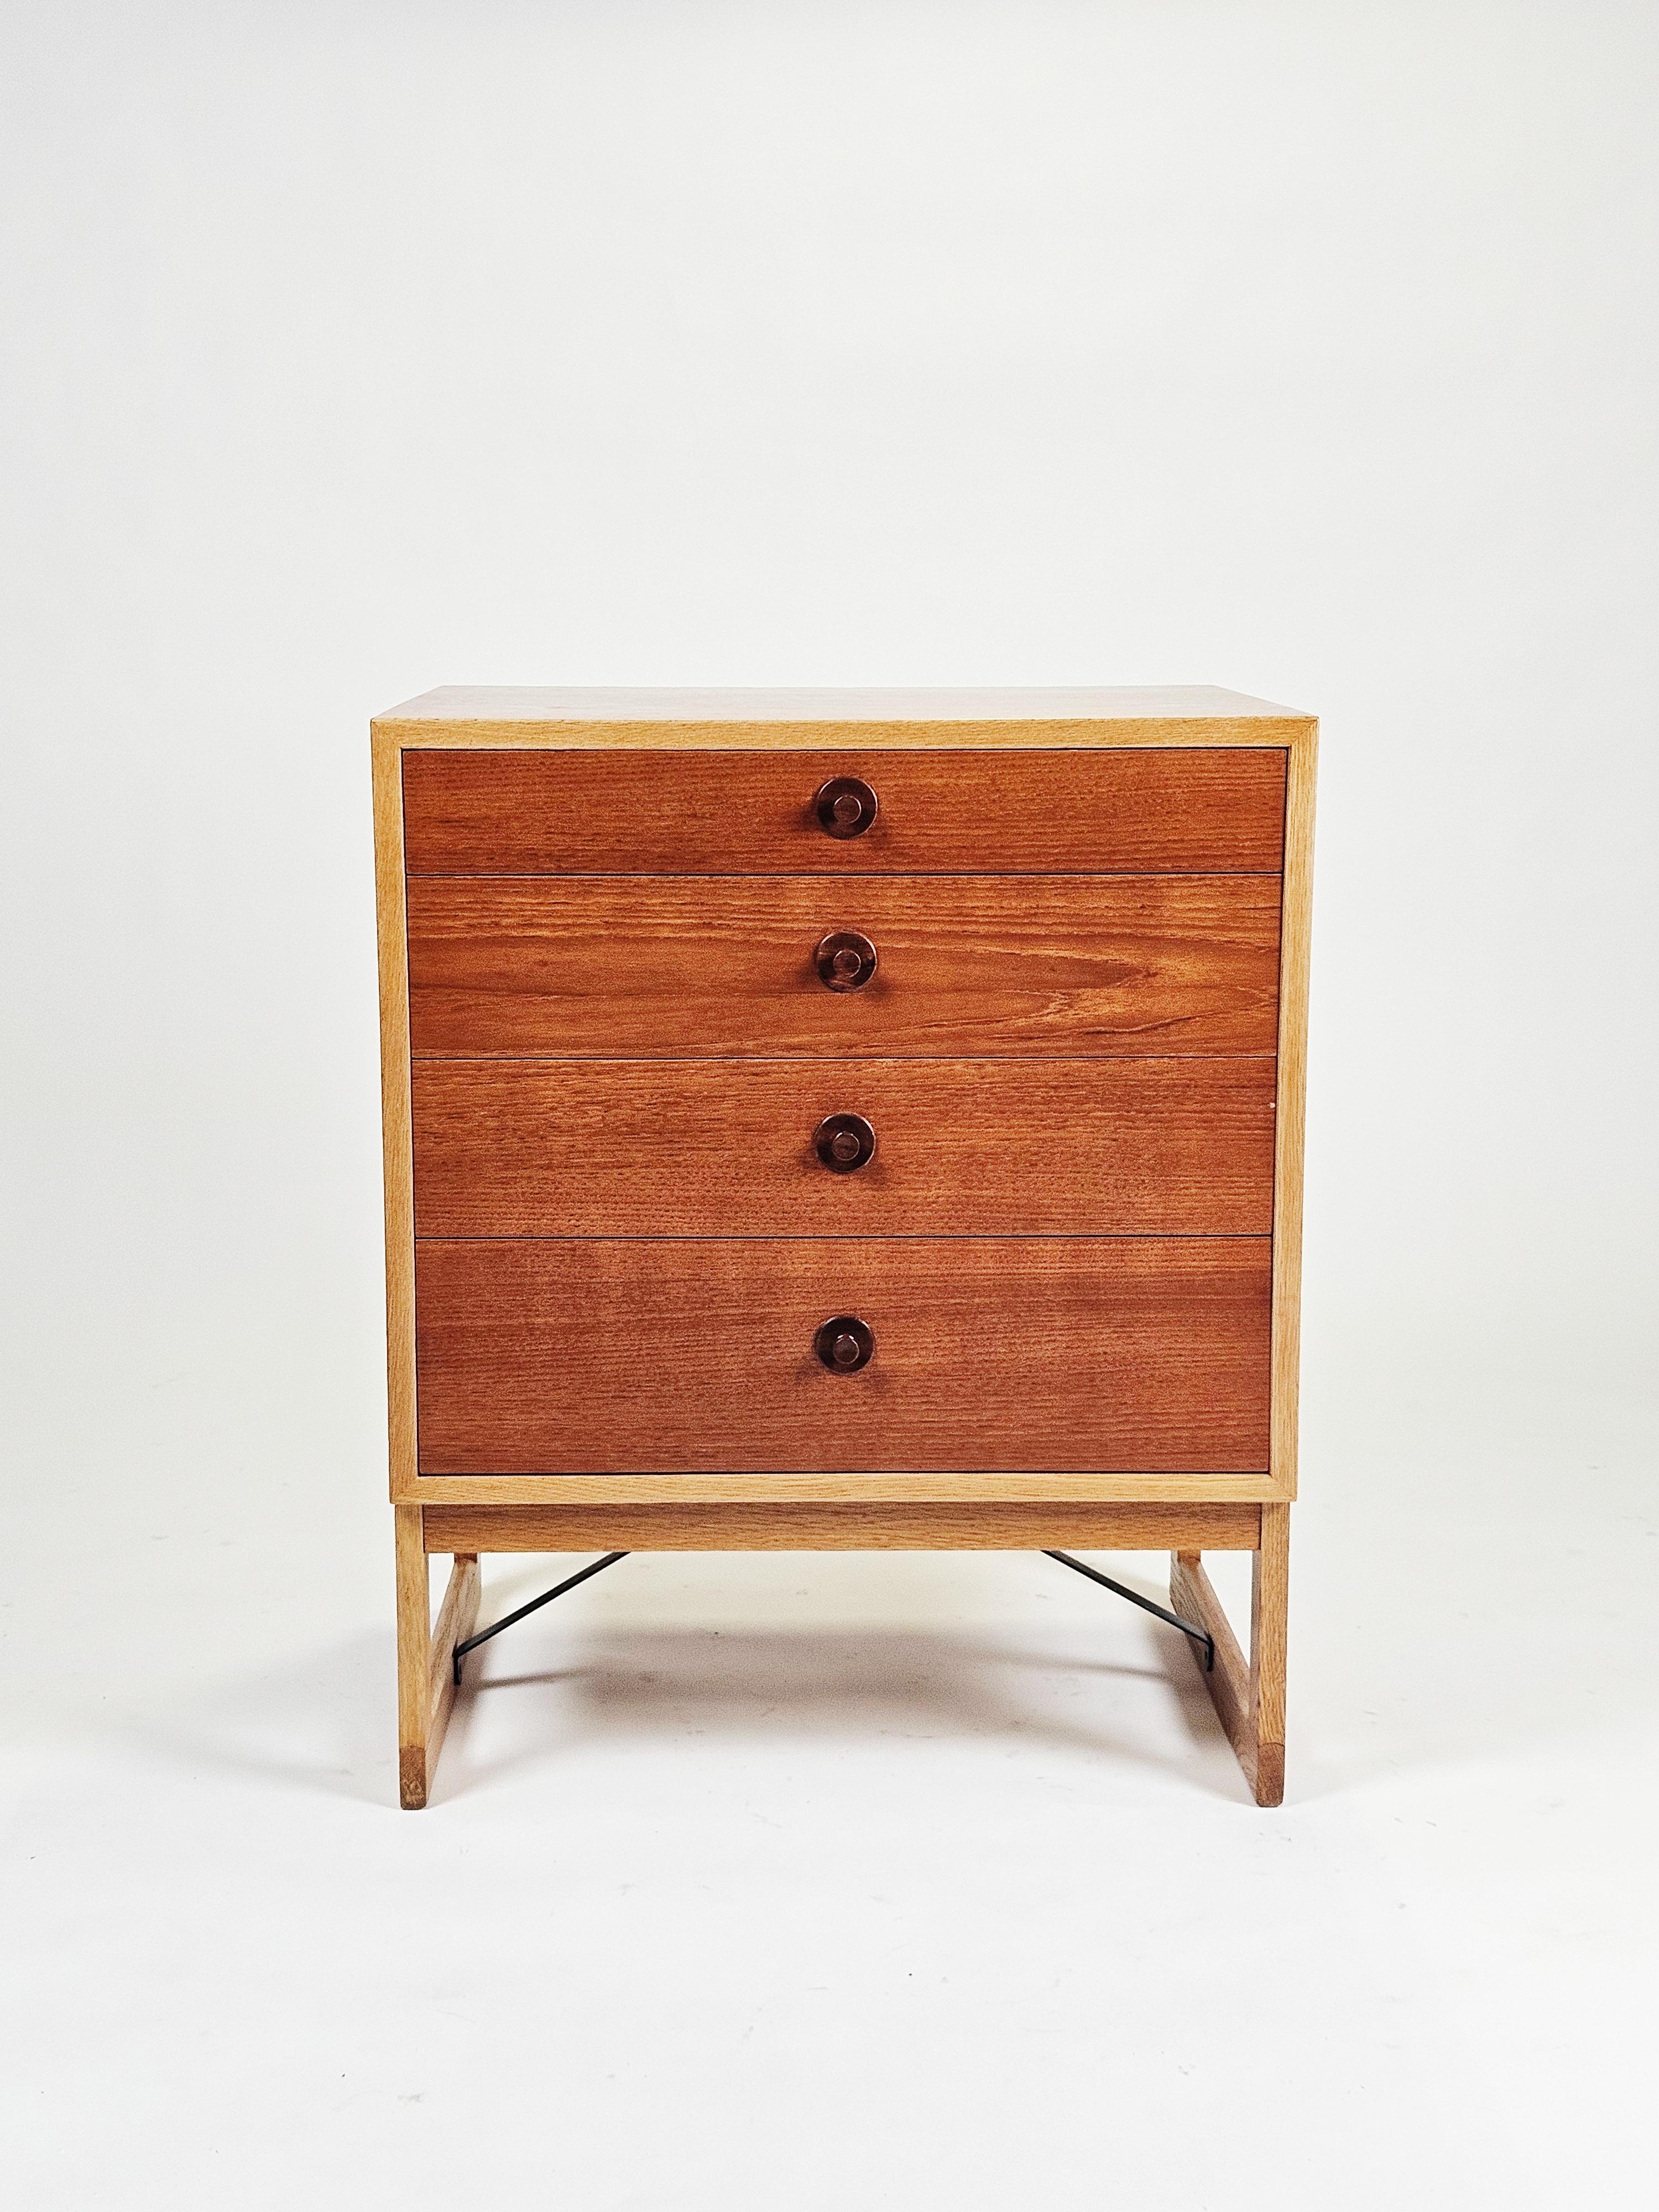 Chest of drawers designed by Børge Mogensen and produced by Karl Andersson & Söner in Sweden during the 1960s. 

Made in oak and teak. Frame and legs in oak with beautiful teak-drawers. 